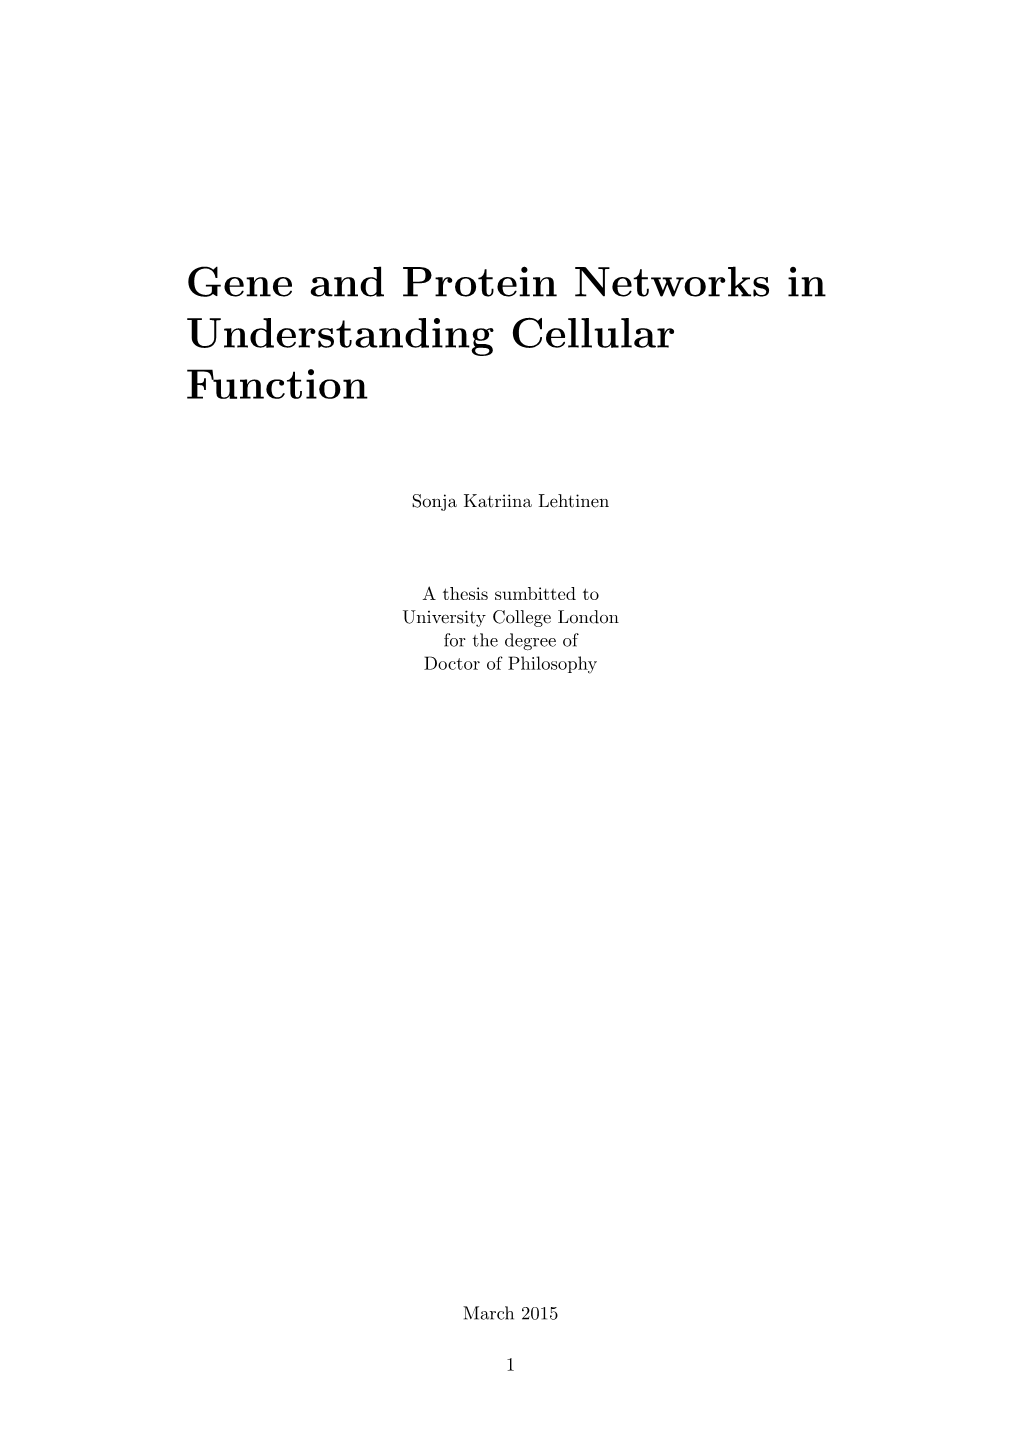 Gene and Protein Networks in Understanding Cellular Function